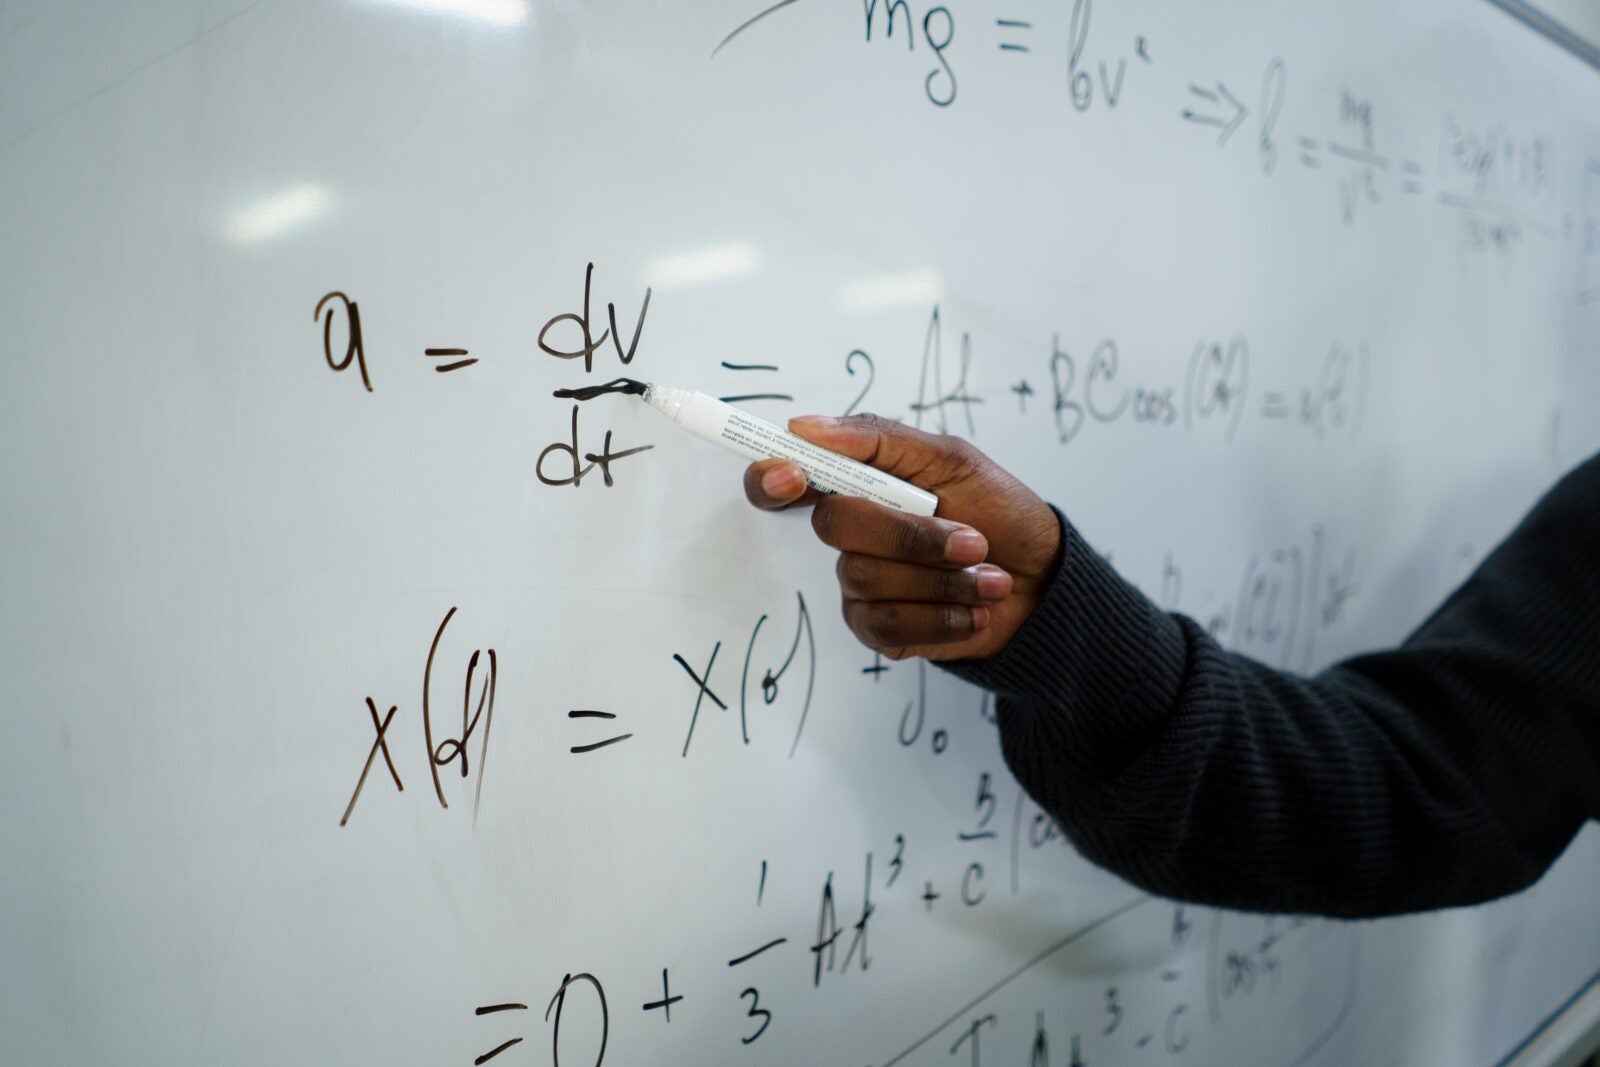 A man with dark skin, holding a marker and writing equations on a whiteboard.